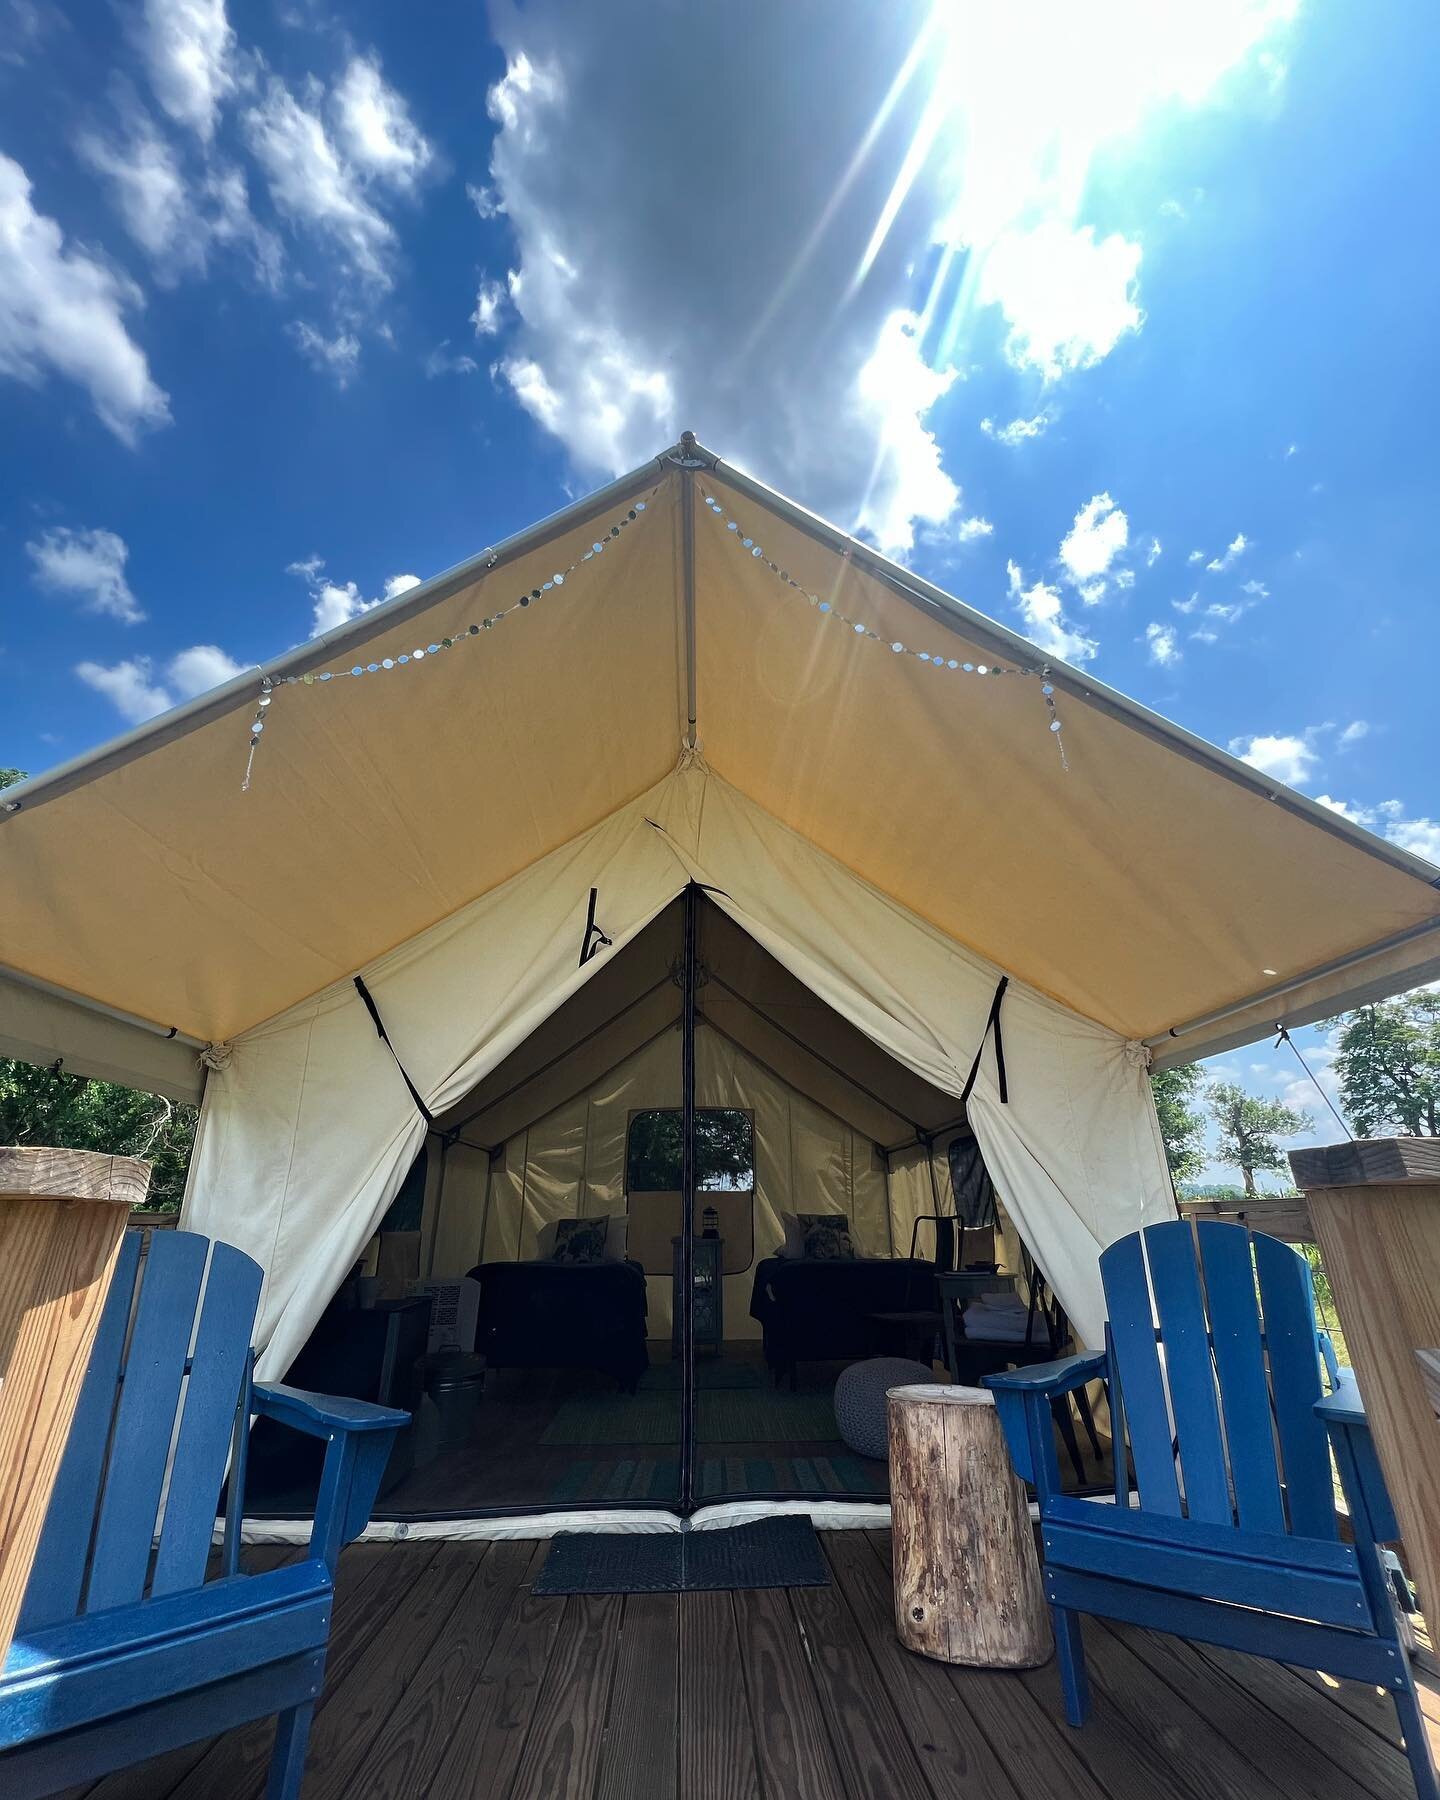 The Hummingbird Tent.

Our grandmother loved hummingbirds and every time we see one on the farm we know she is watching over us so of course this tent is named for her favorite bird.

Those little creatures return year after year, kinda reminds me of